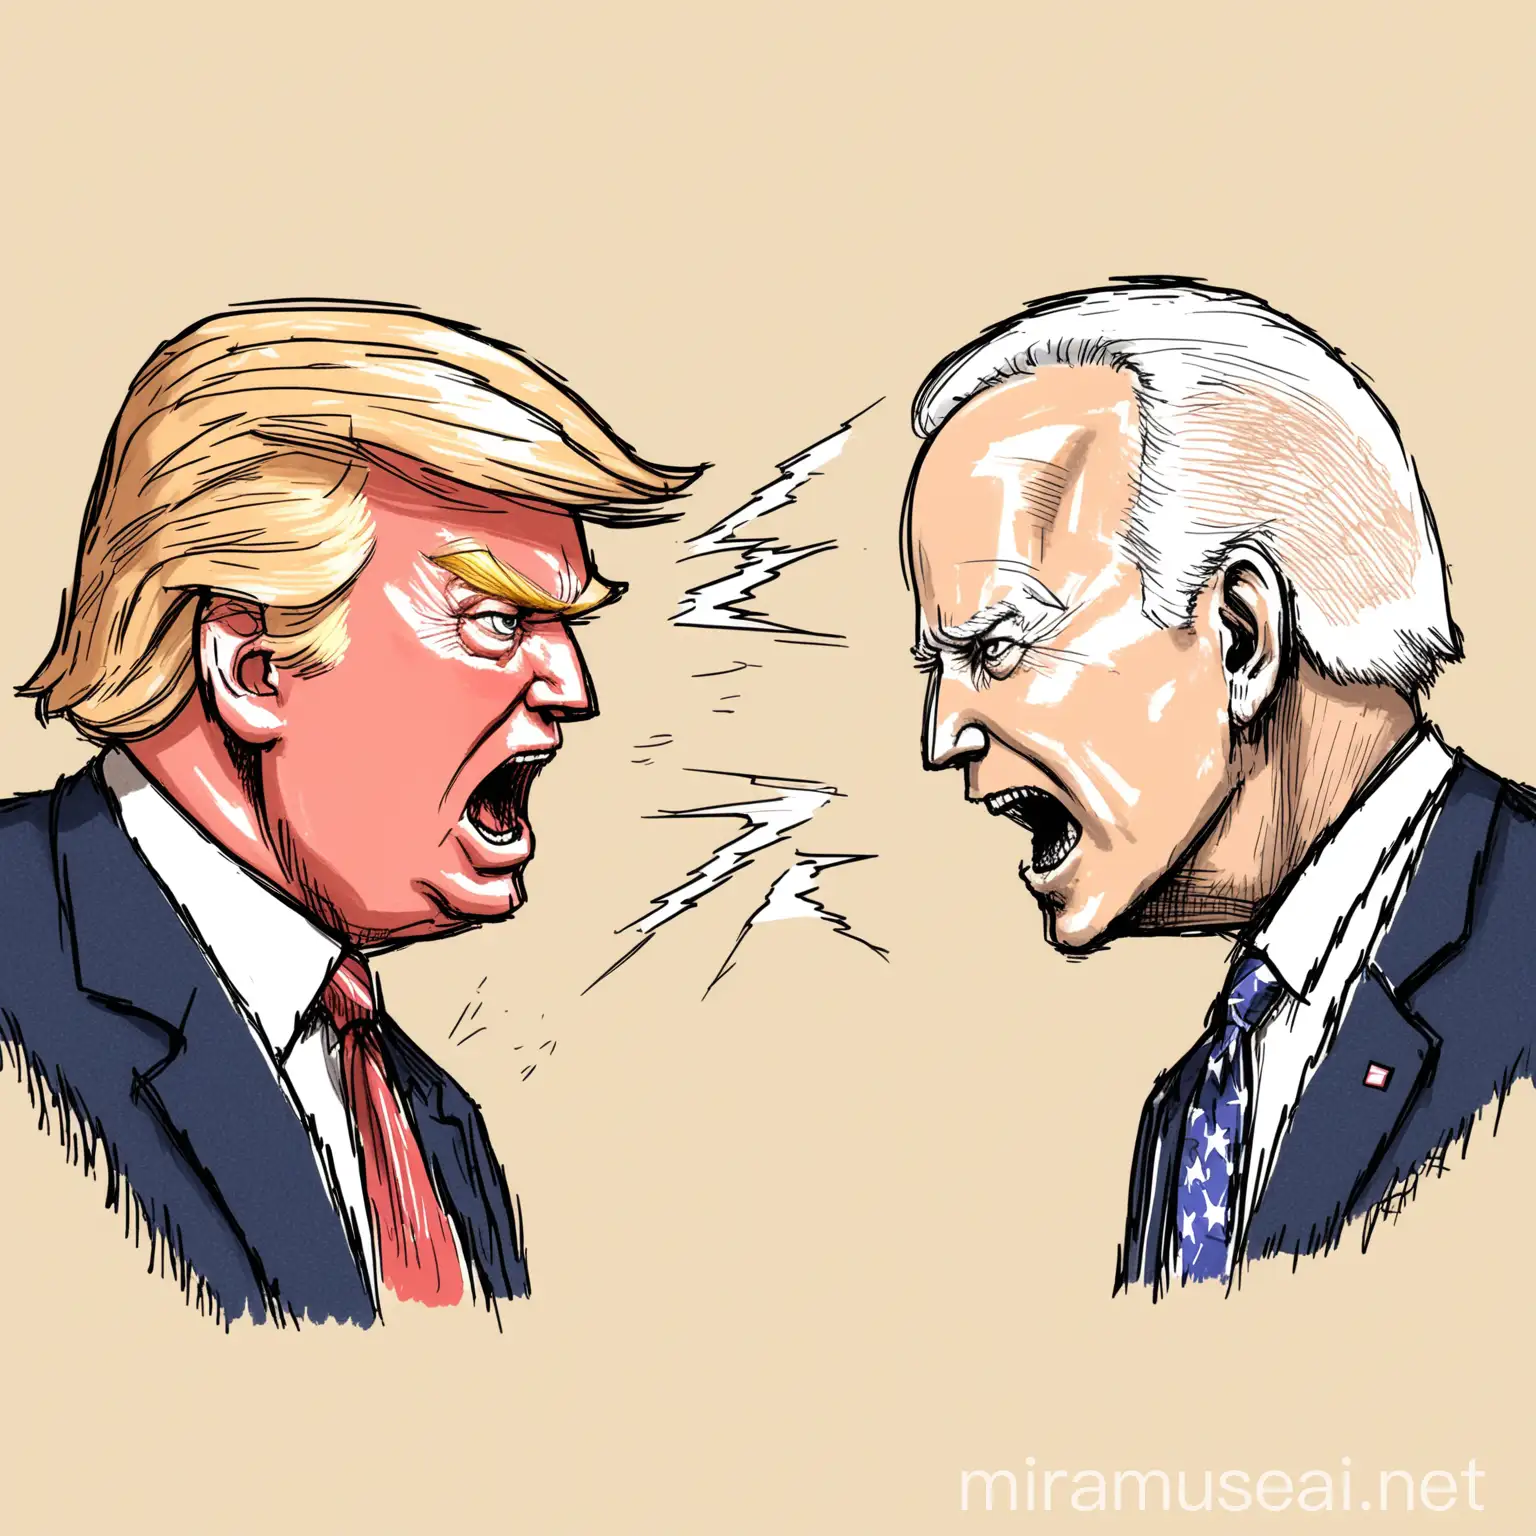 hand drawn illustration of Donald Trump and Joe Biden arguing each other


